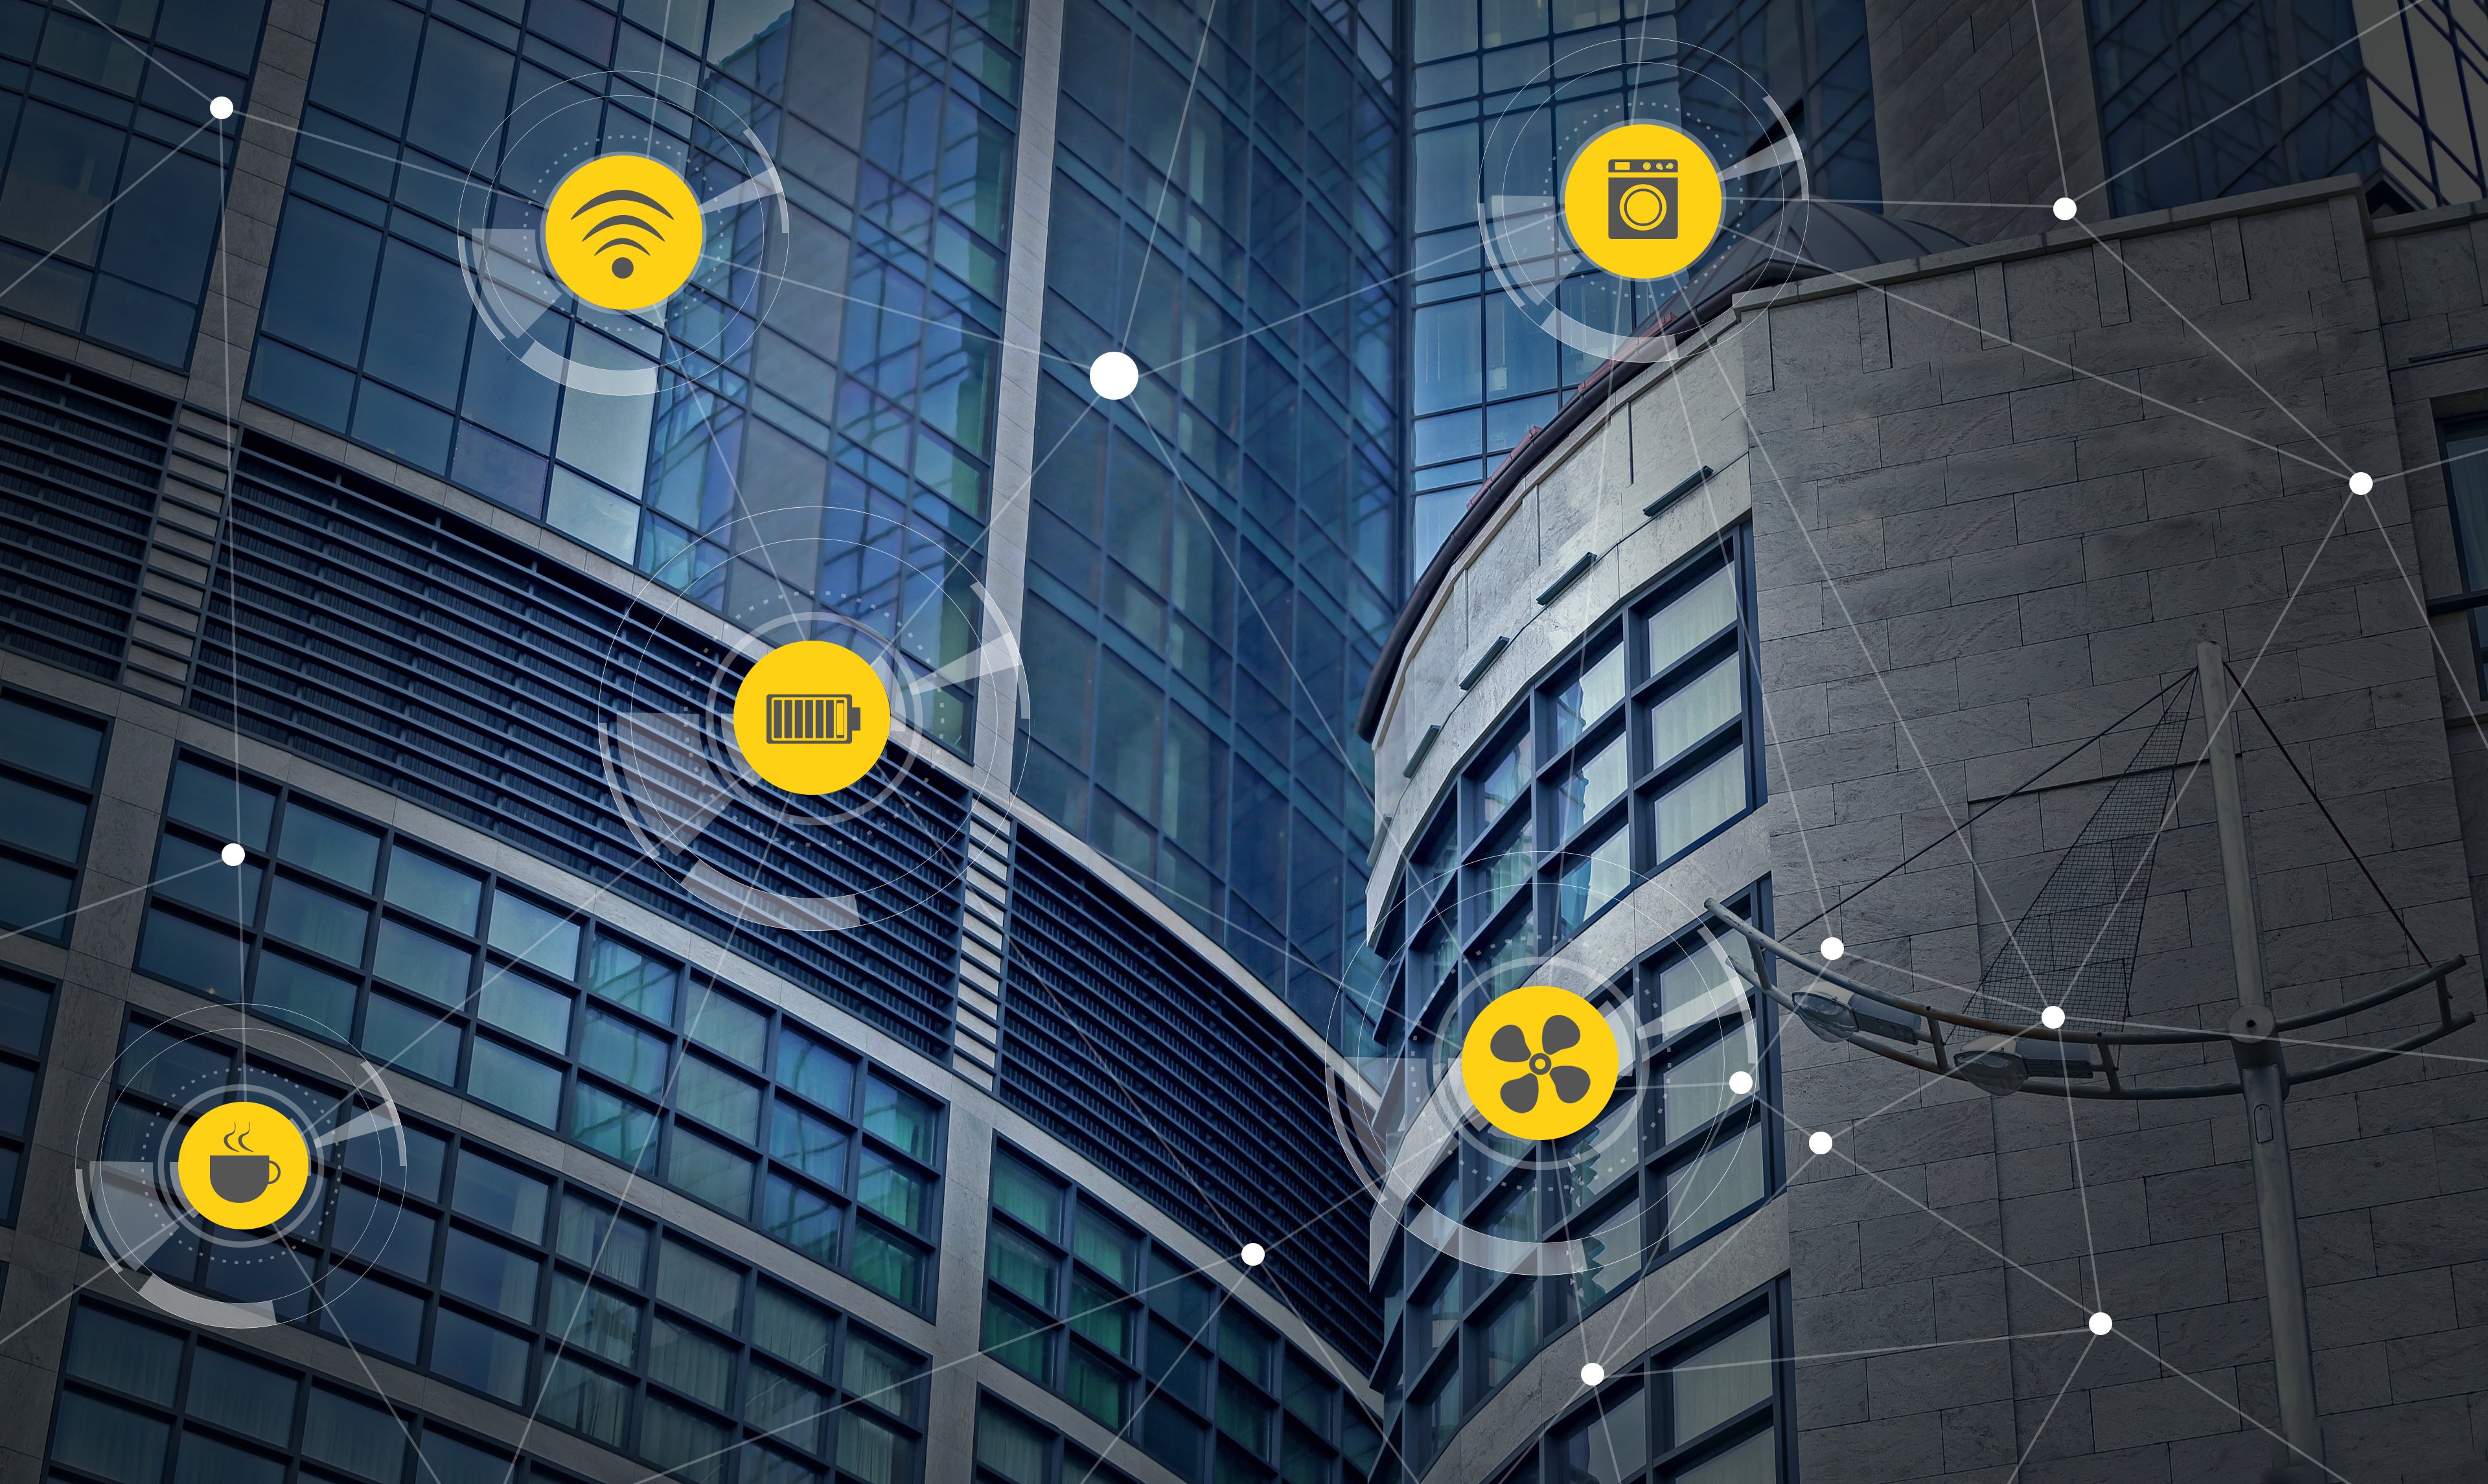 building system icons connected over a skyscraper representing the importance of BMS cyber security